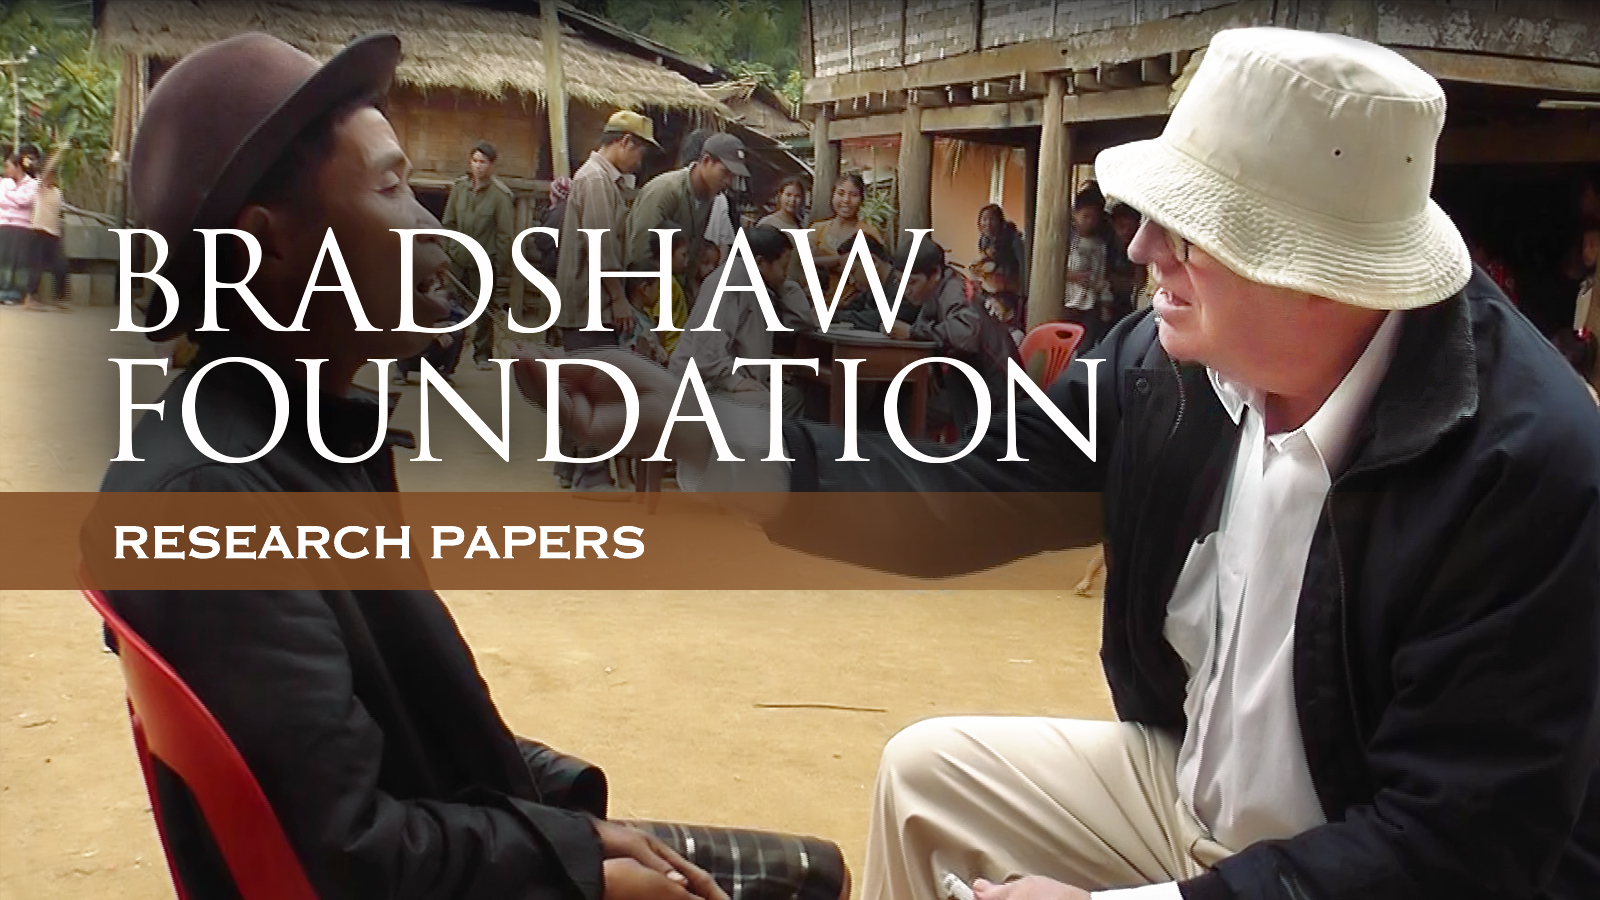 Bradshaw Foundation Research Papers